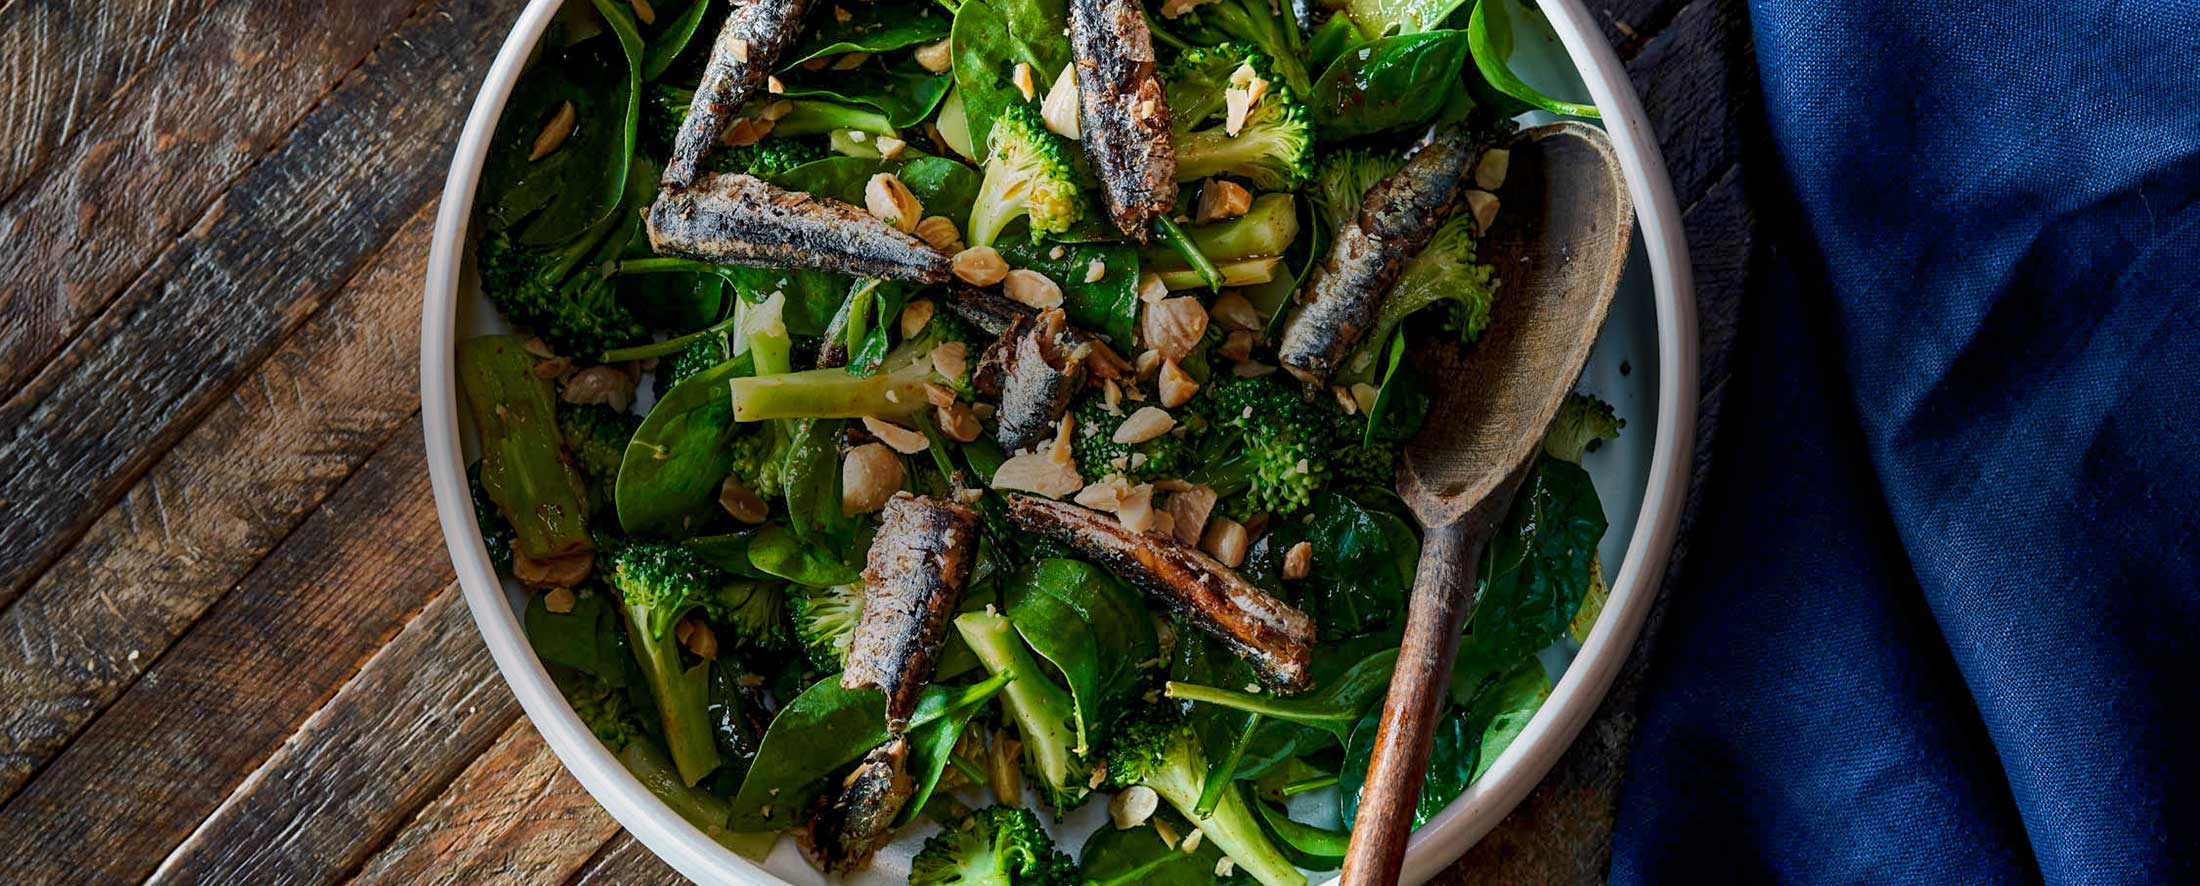 A bowl of dark green salad topped with Patagonia Provisions tinned anchovies, nuts, and broccoli